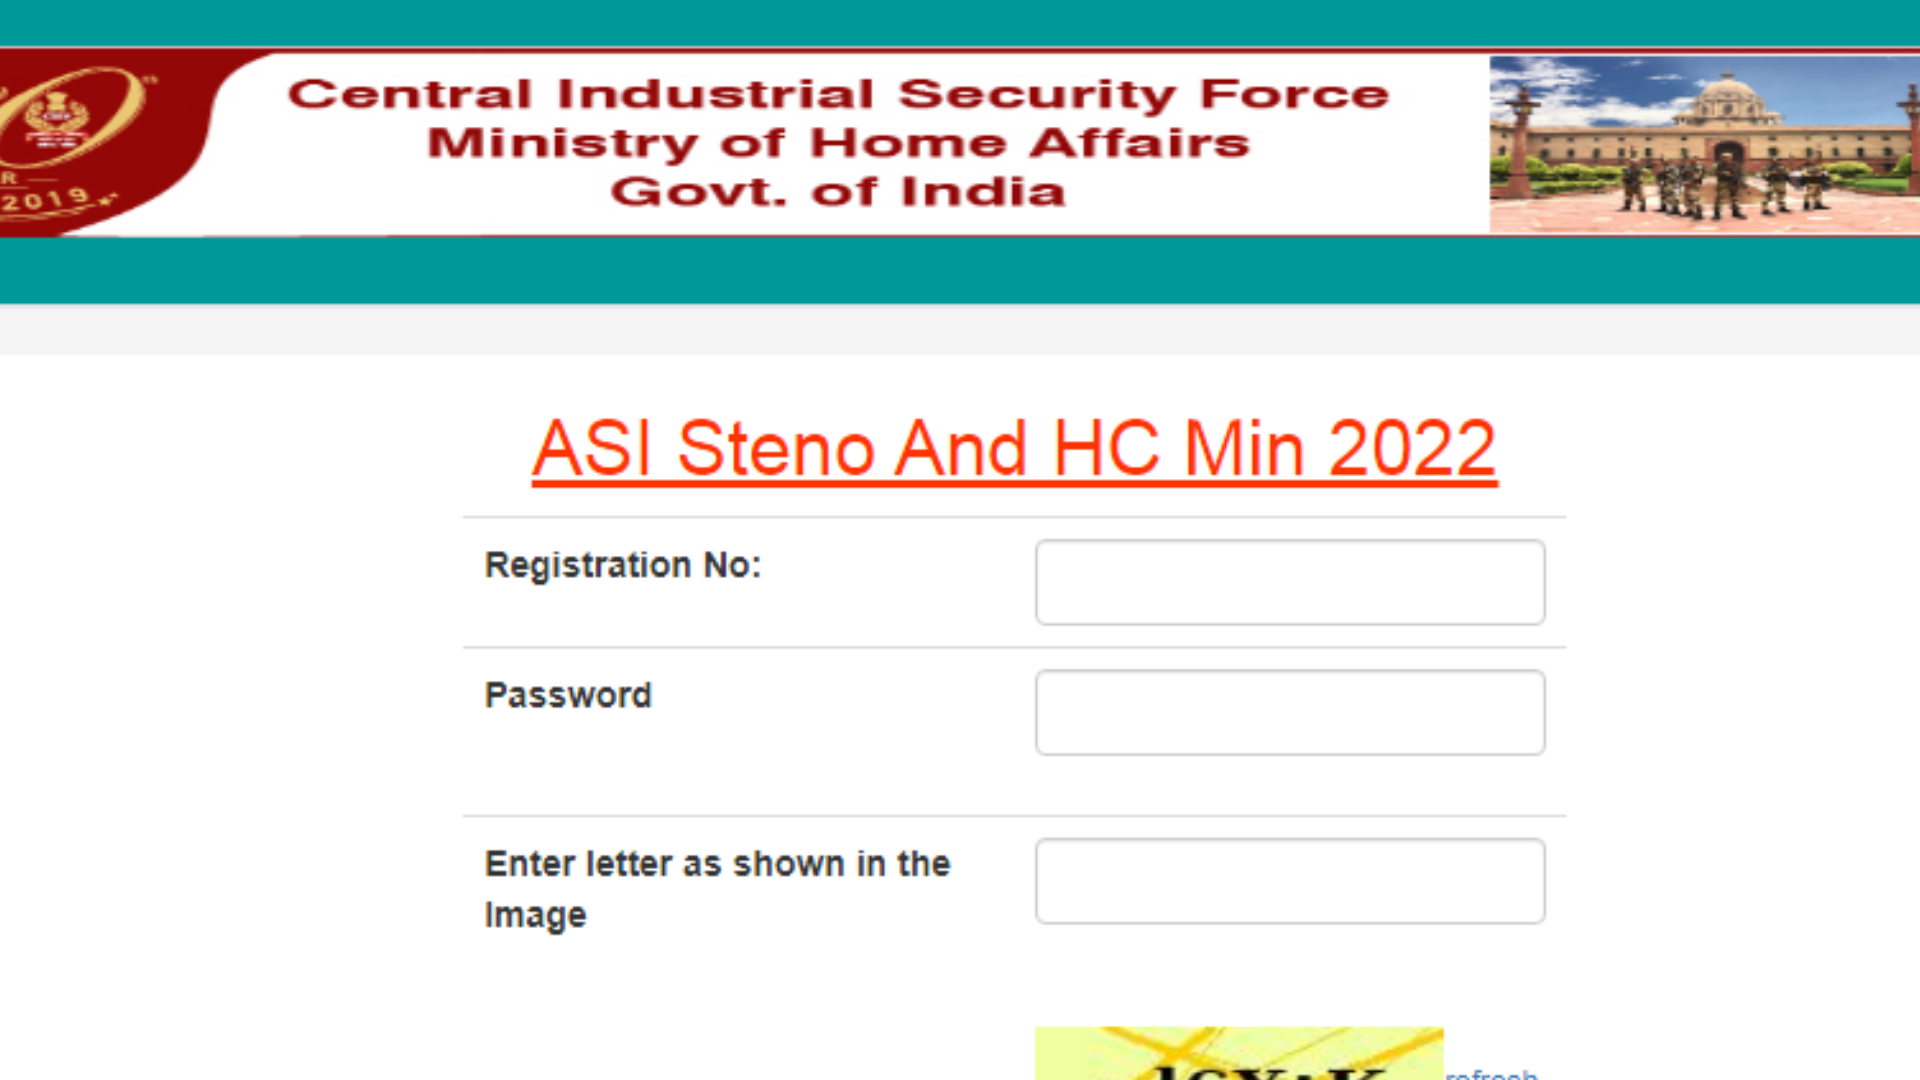 CISF ASI Stenographer & Head Constable Ministerial Skill Test Exam Results, DME Admit Card 2024 for 540 Post